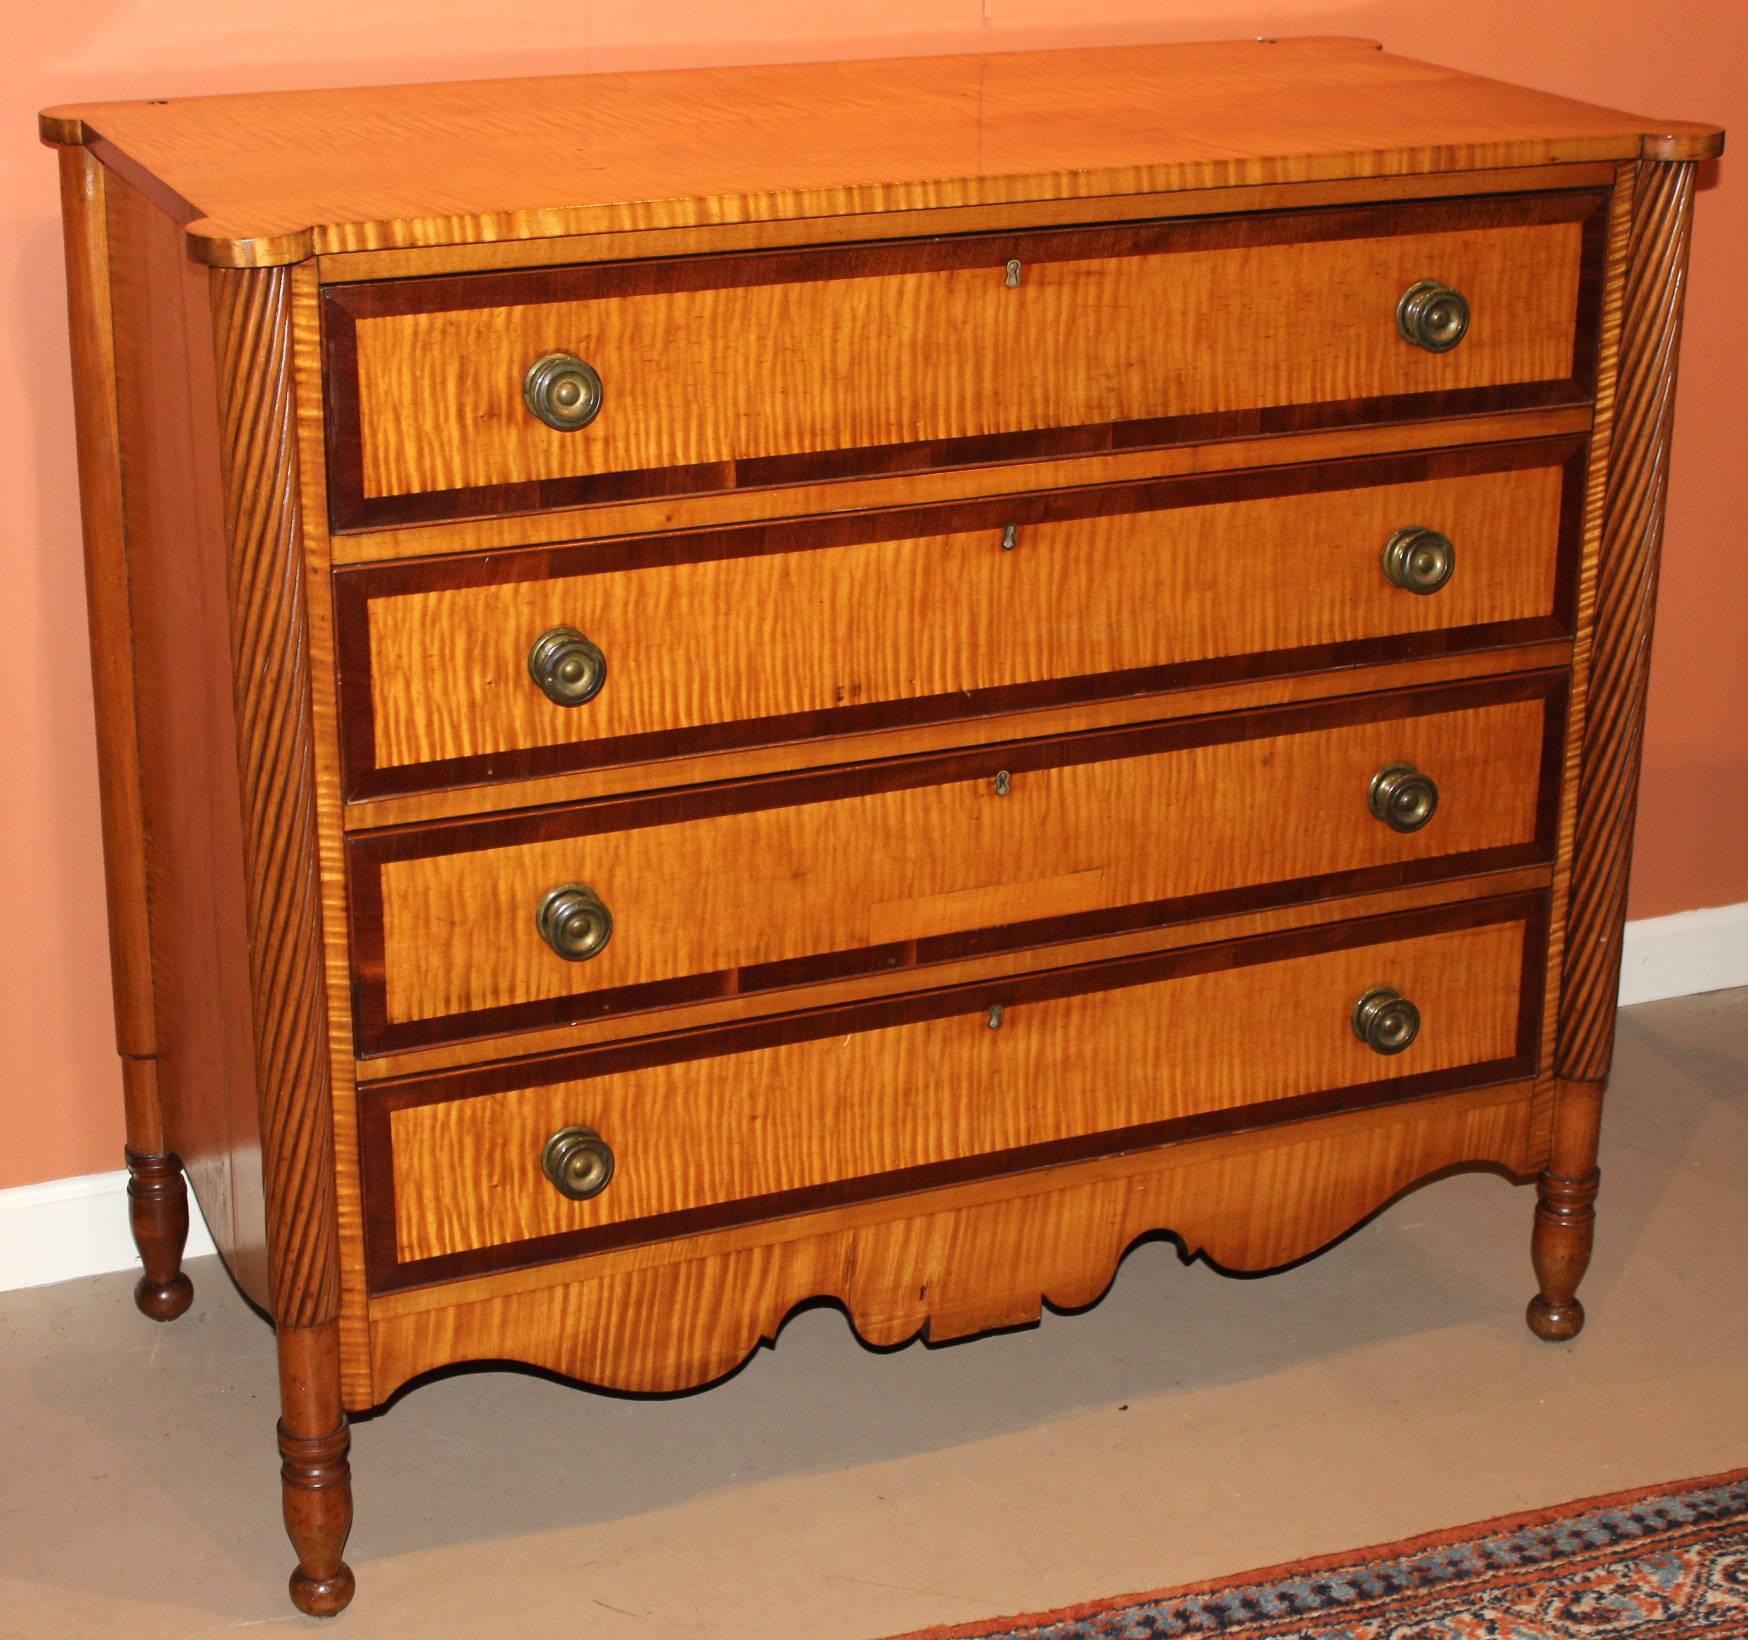 A Federal period Sheraton tiger maple chest featuring a removable crest with turned pilasters above a rectangular top with ovolu corners and four cherrywood banded and beaded drawers appearing to retain their original punched brass hardware. The